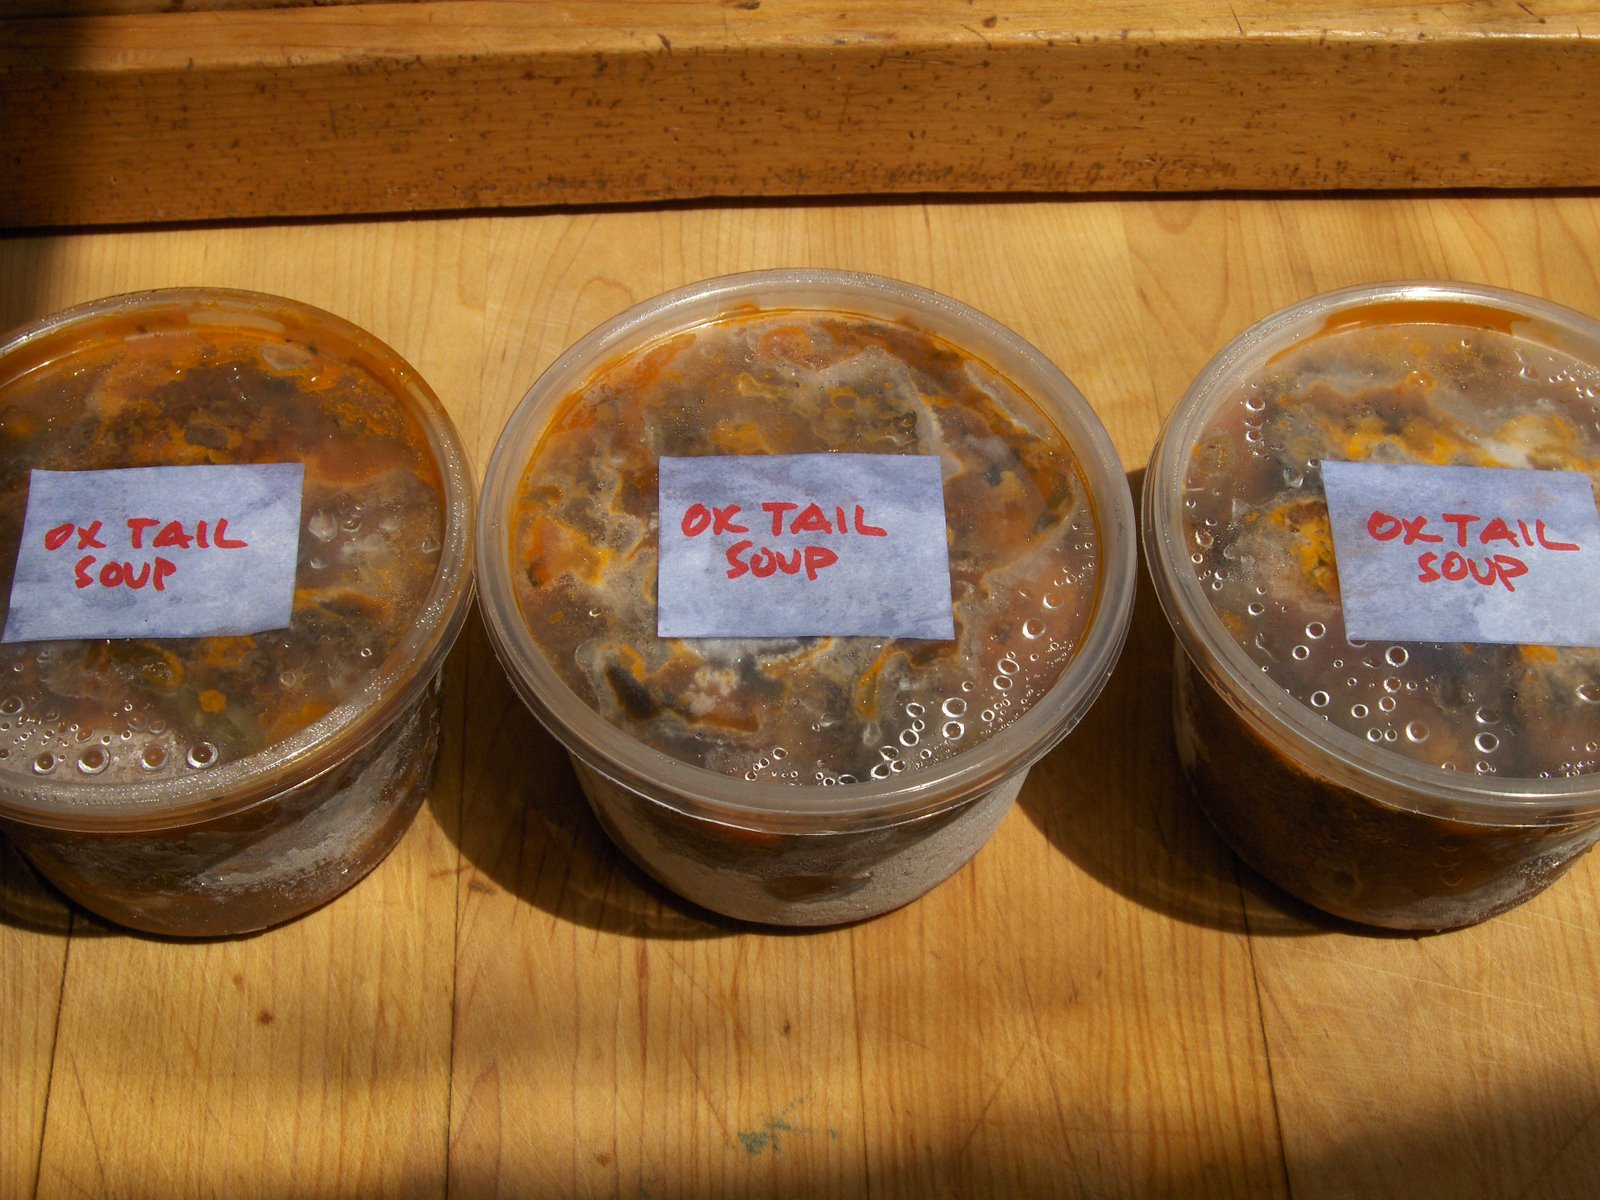 [Ox+Tail+soup+in+containers.JPG]